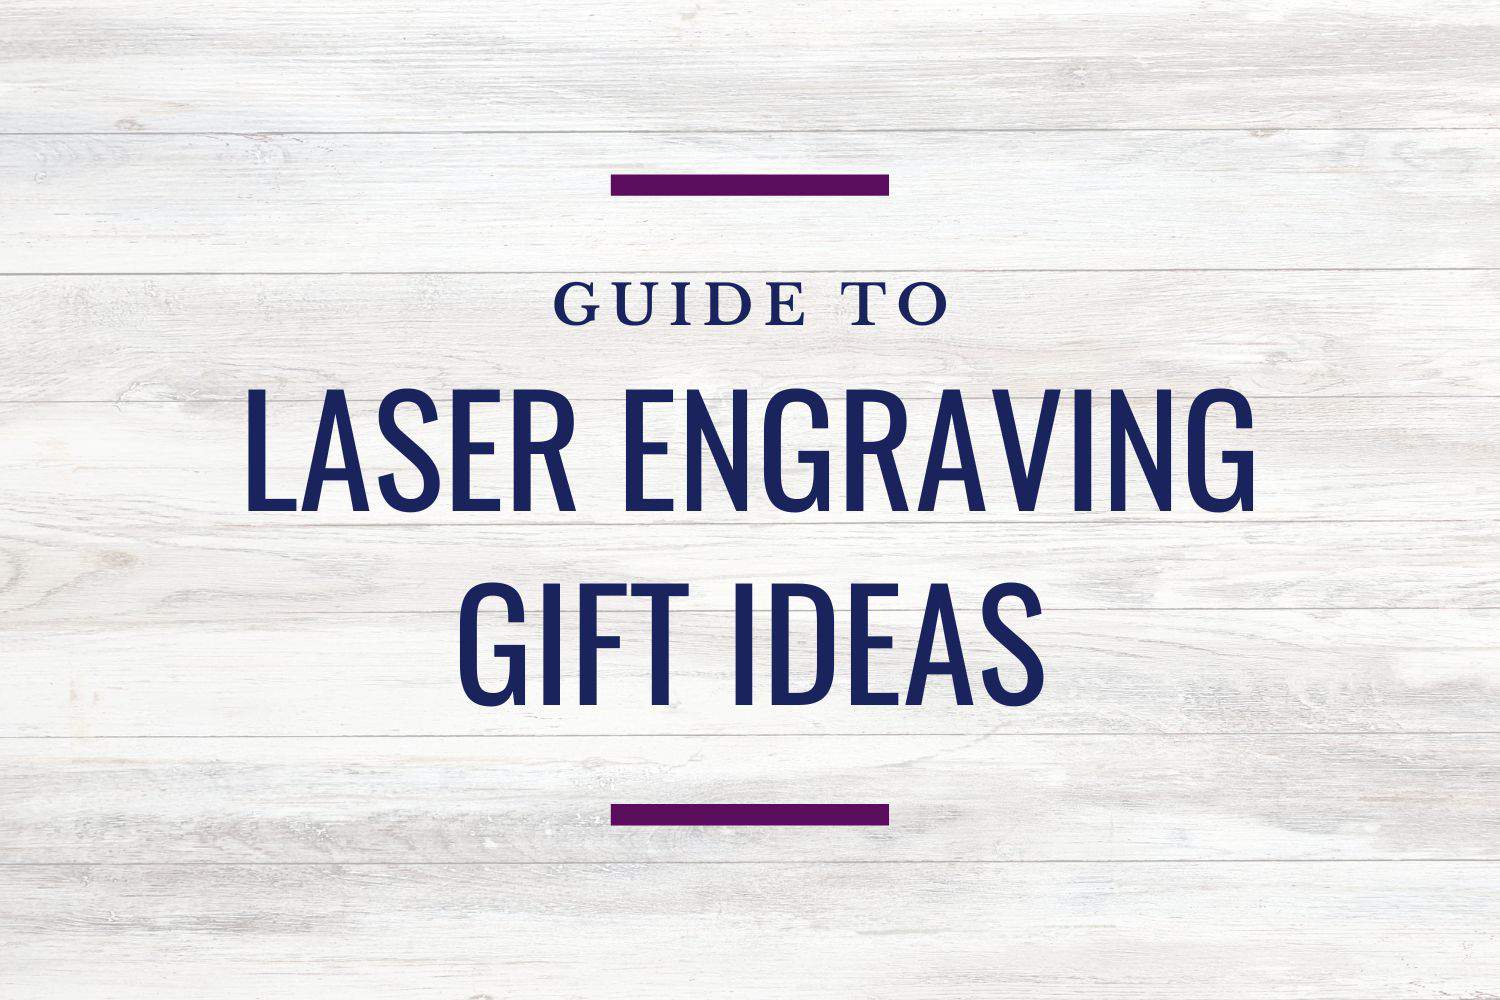 Best Laser Engraving Ideas and Projects That Can Make Money